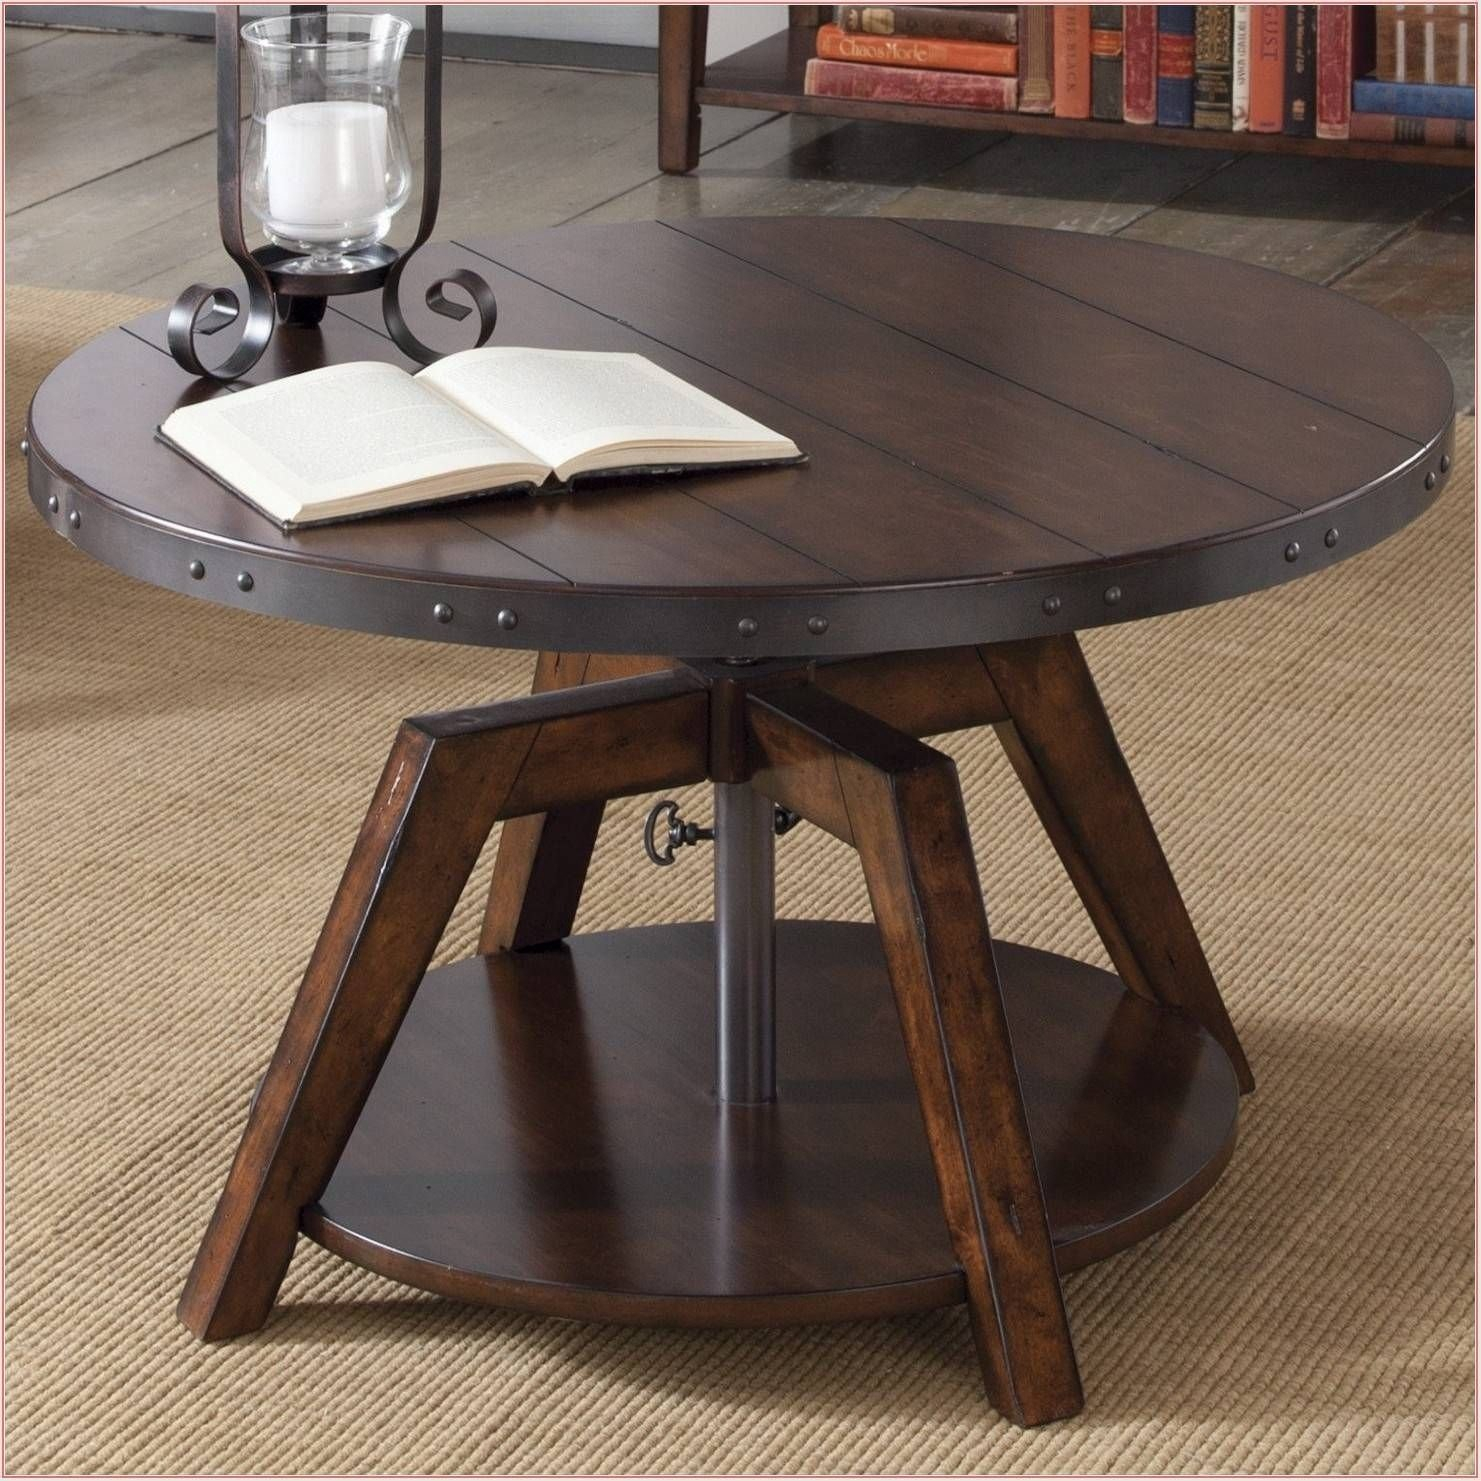 50 Amazing Convertible Coffee Table To Dining Table Up To 70 Off throughout measurements 1481 X 1481